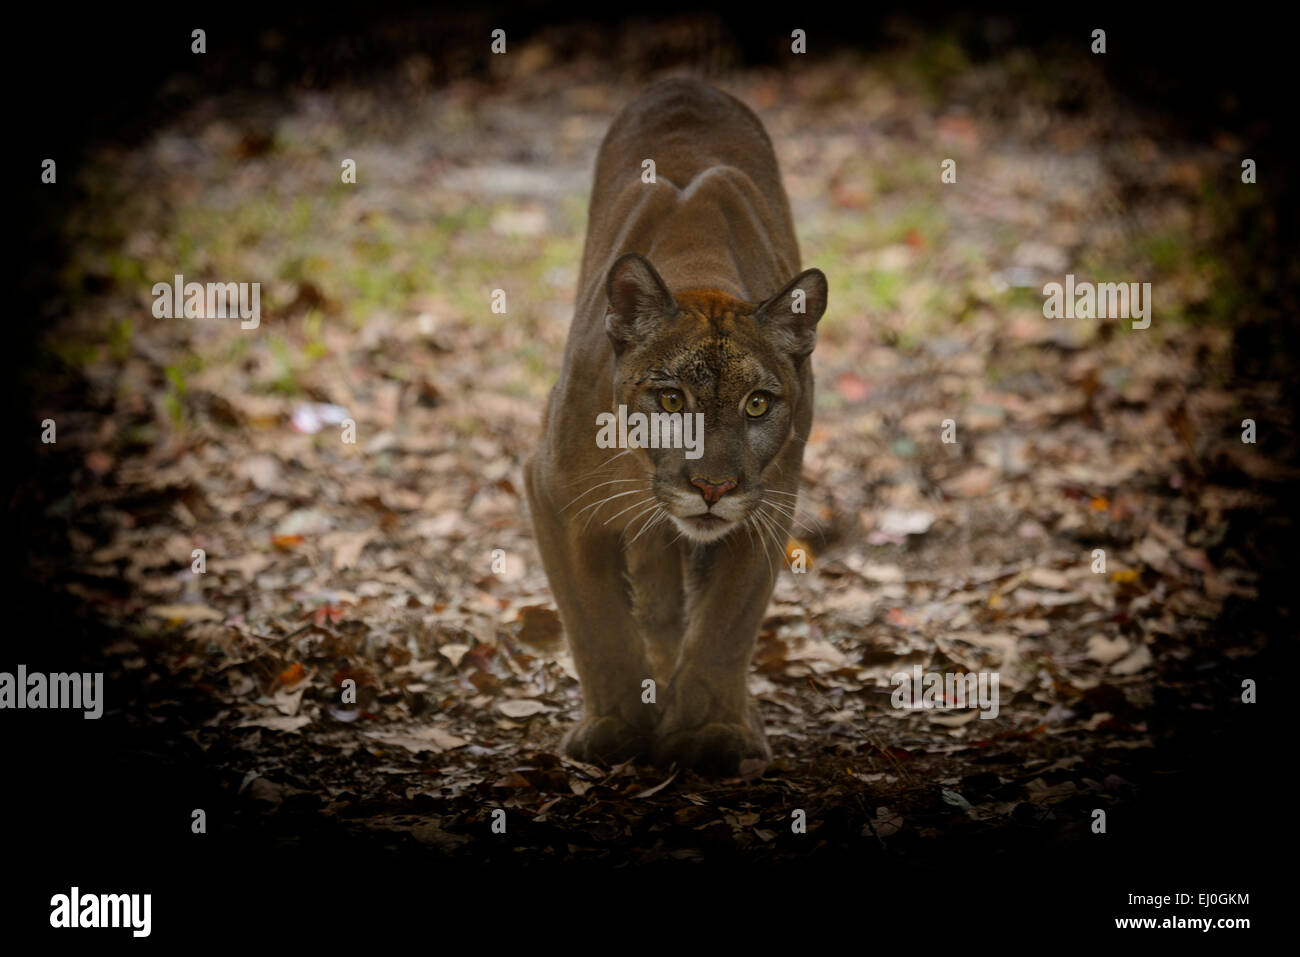 USA, Florida, Tallahassee, Panhandle, Puma Concolor Coryi, Florida Panther in Tallahassee Museum, unverlierbare Puma Stockfoto